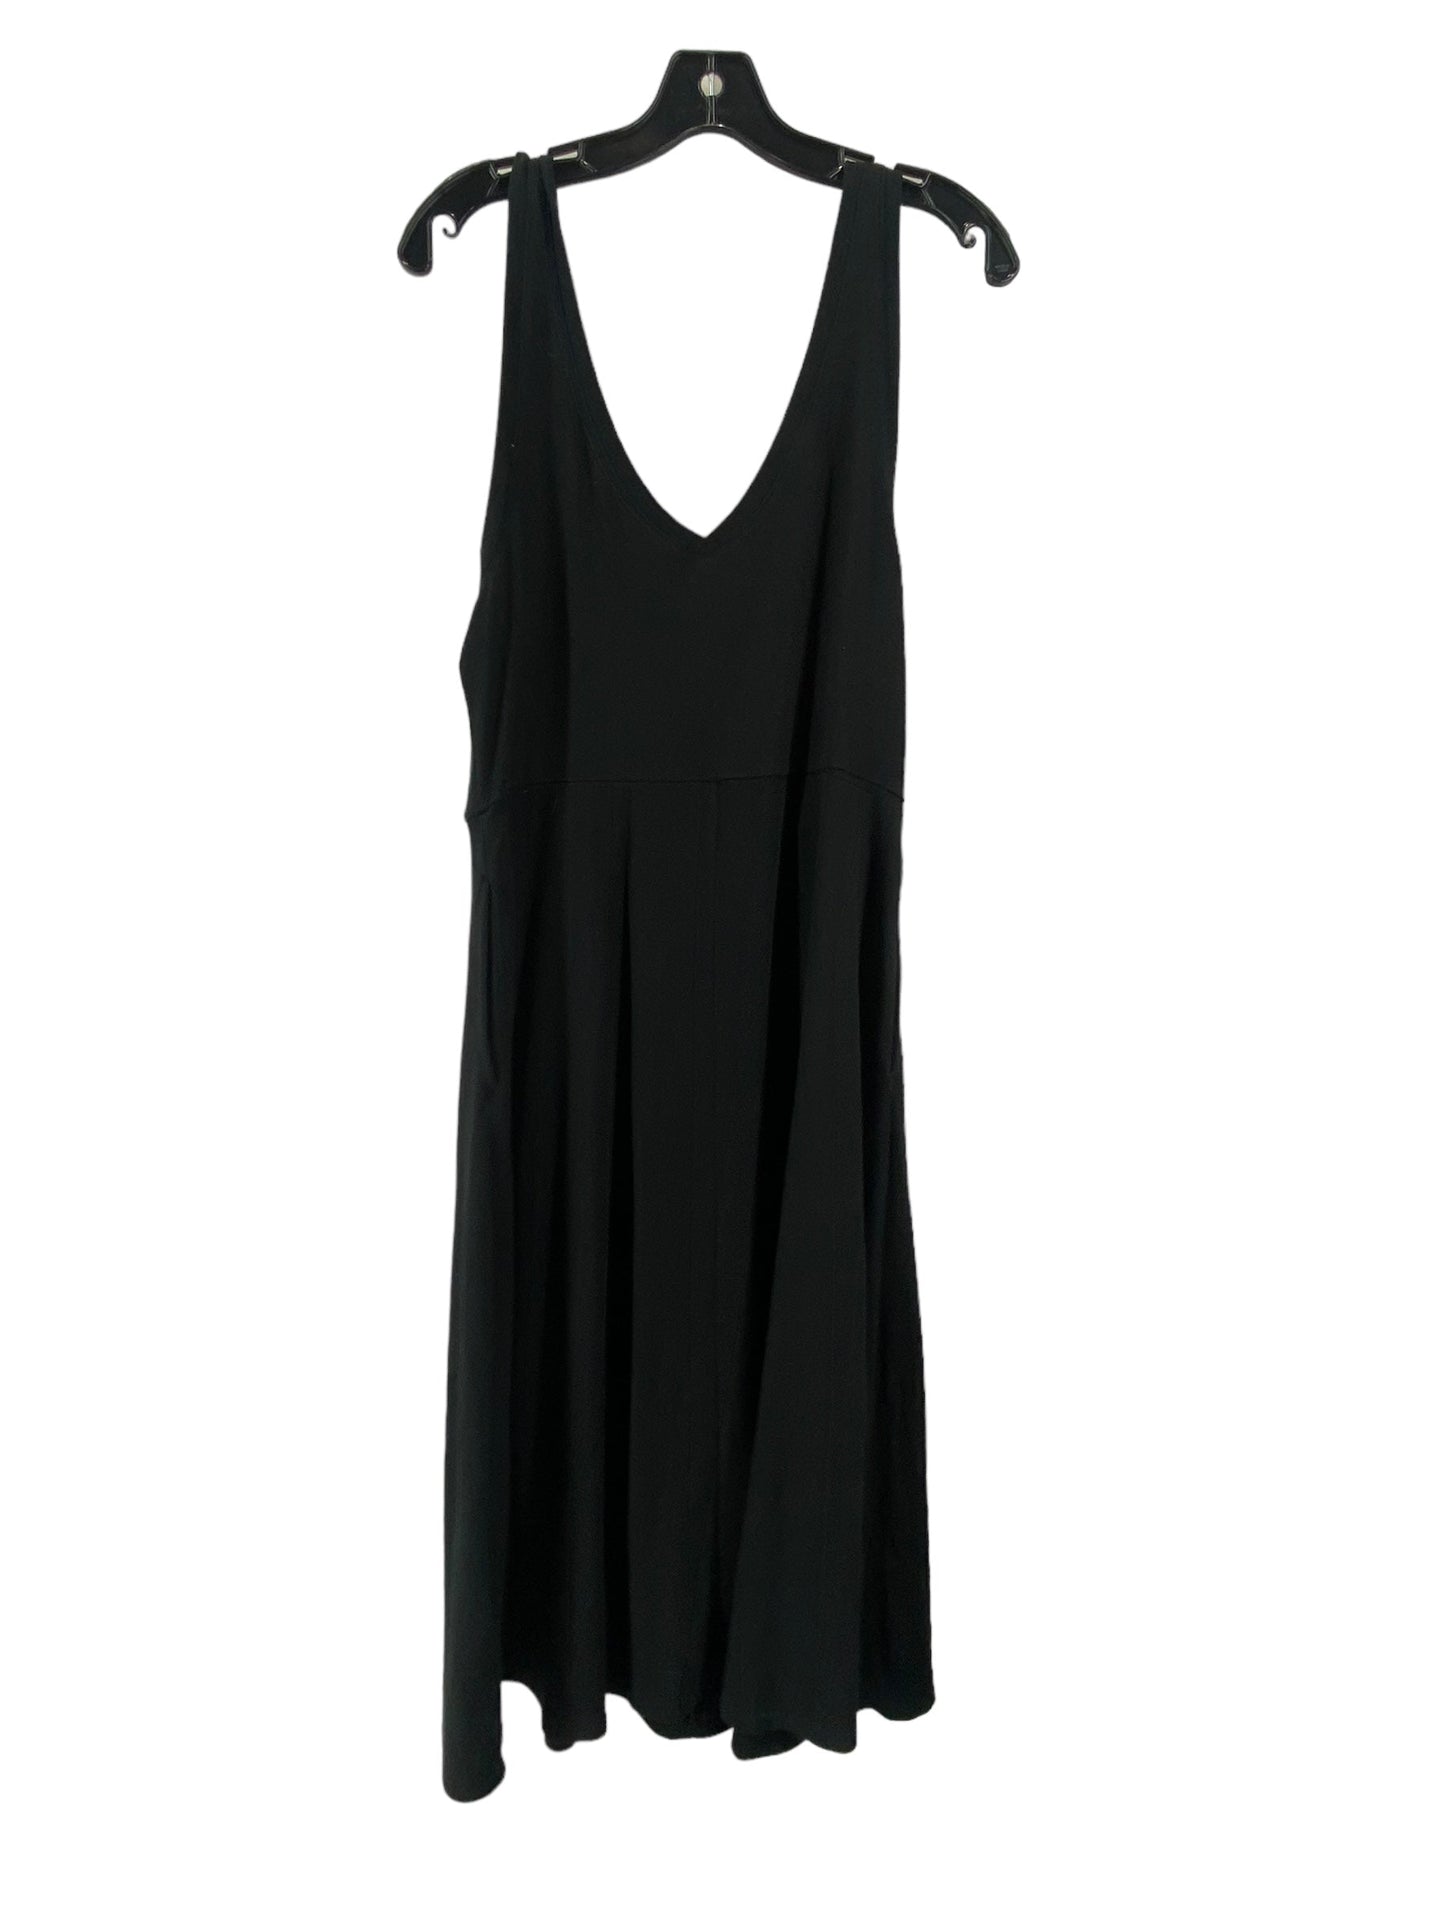 Black Dress Casual Maxi A New Day, Size Xl